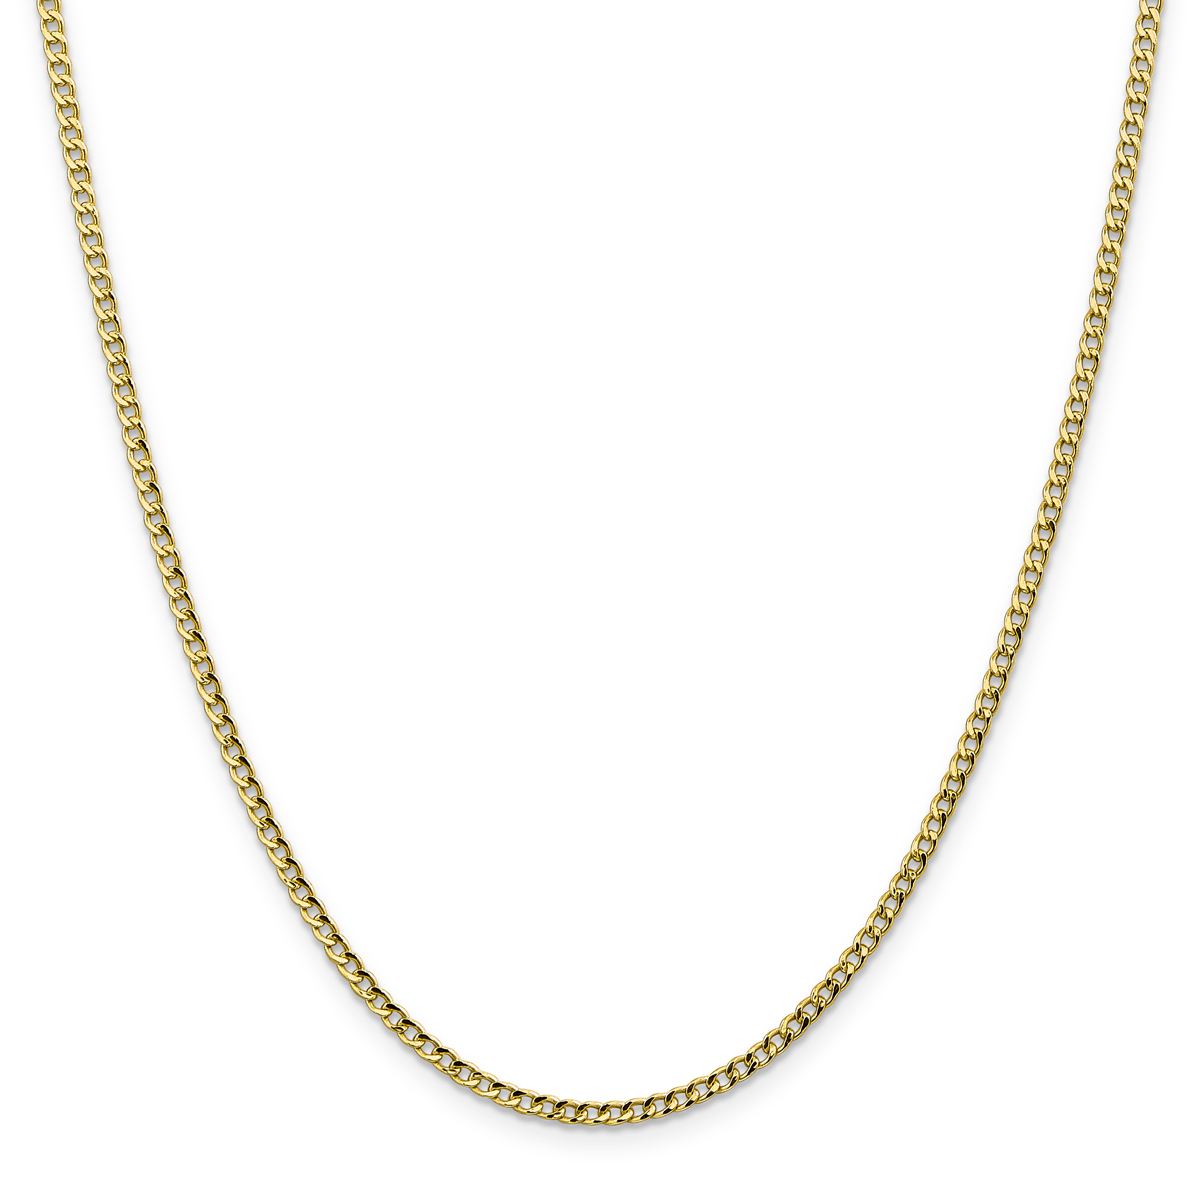 Unisex Gold Classics(tm) 10kt. 2.5mm 18in. Semi-Solid Chain Necklace